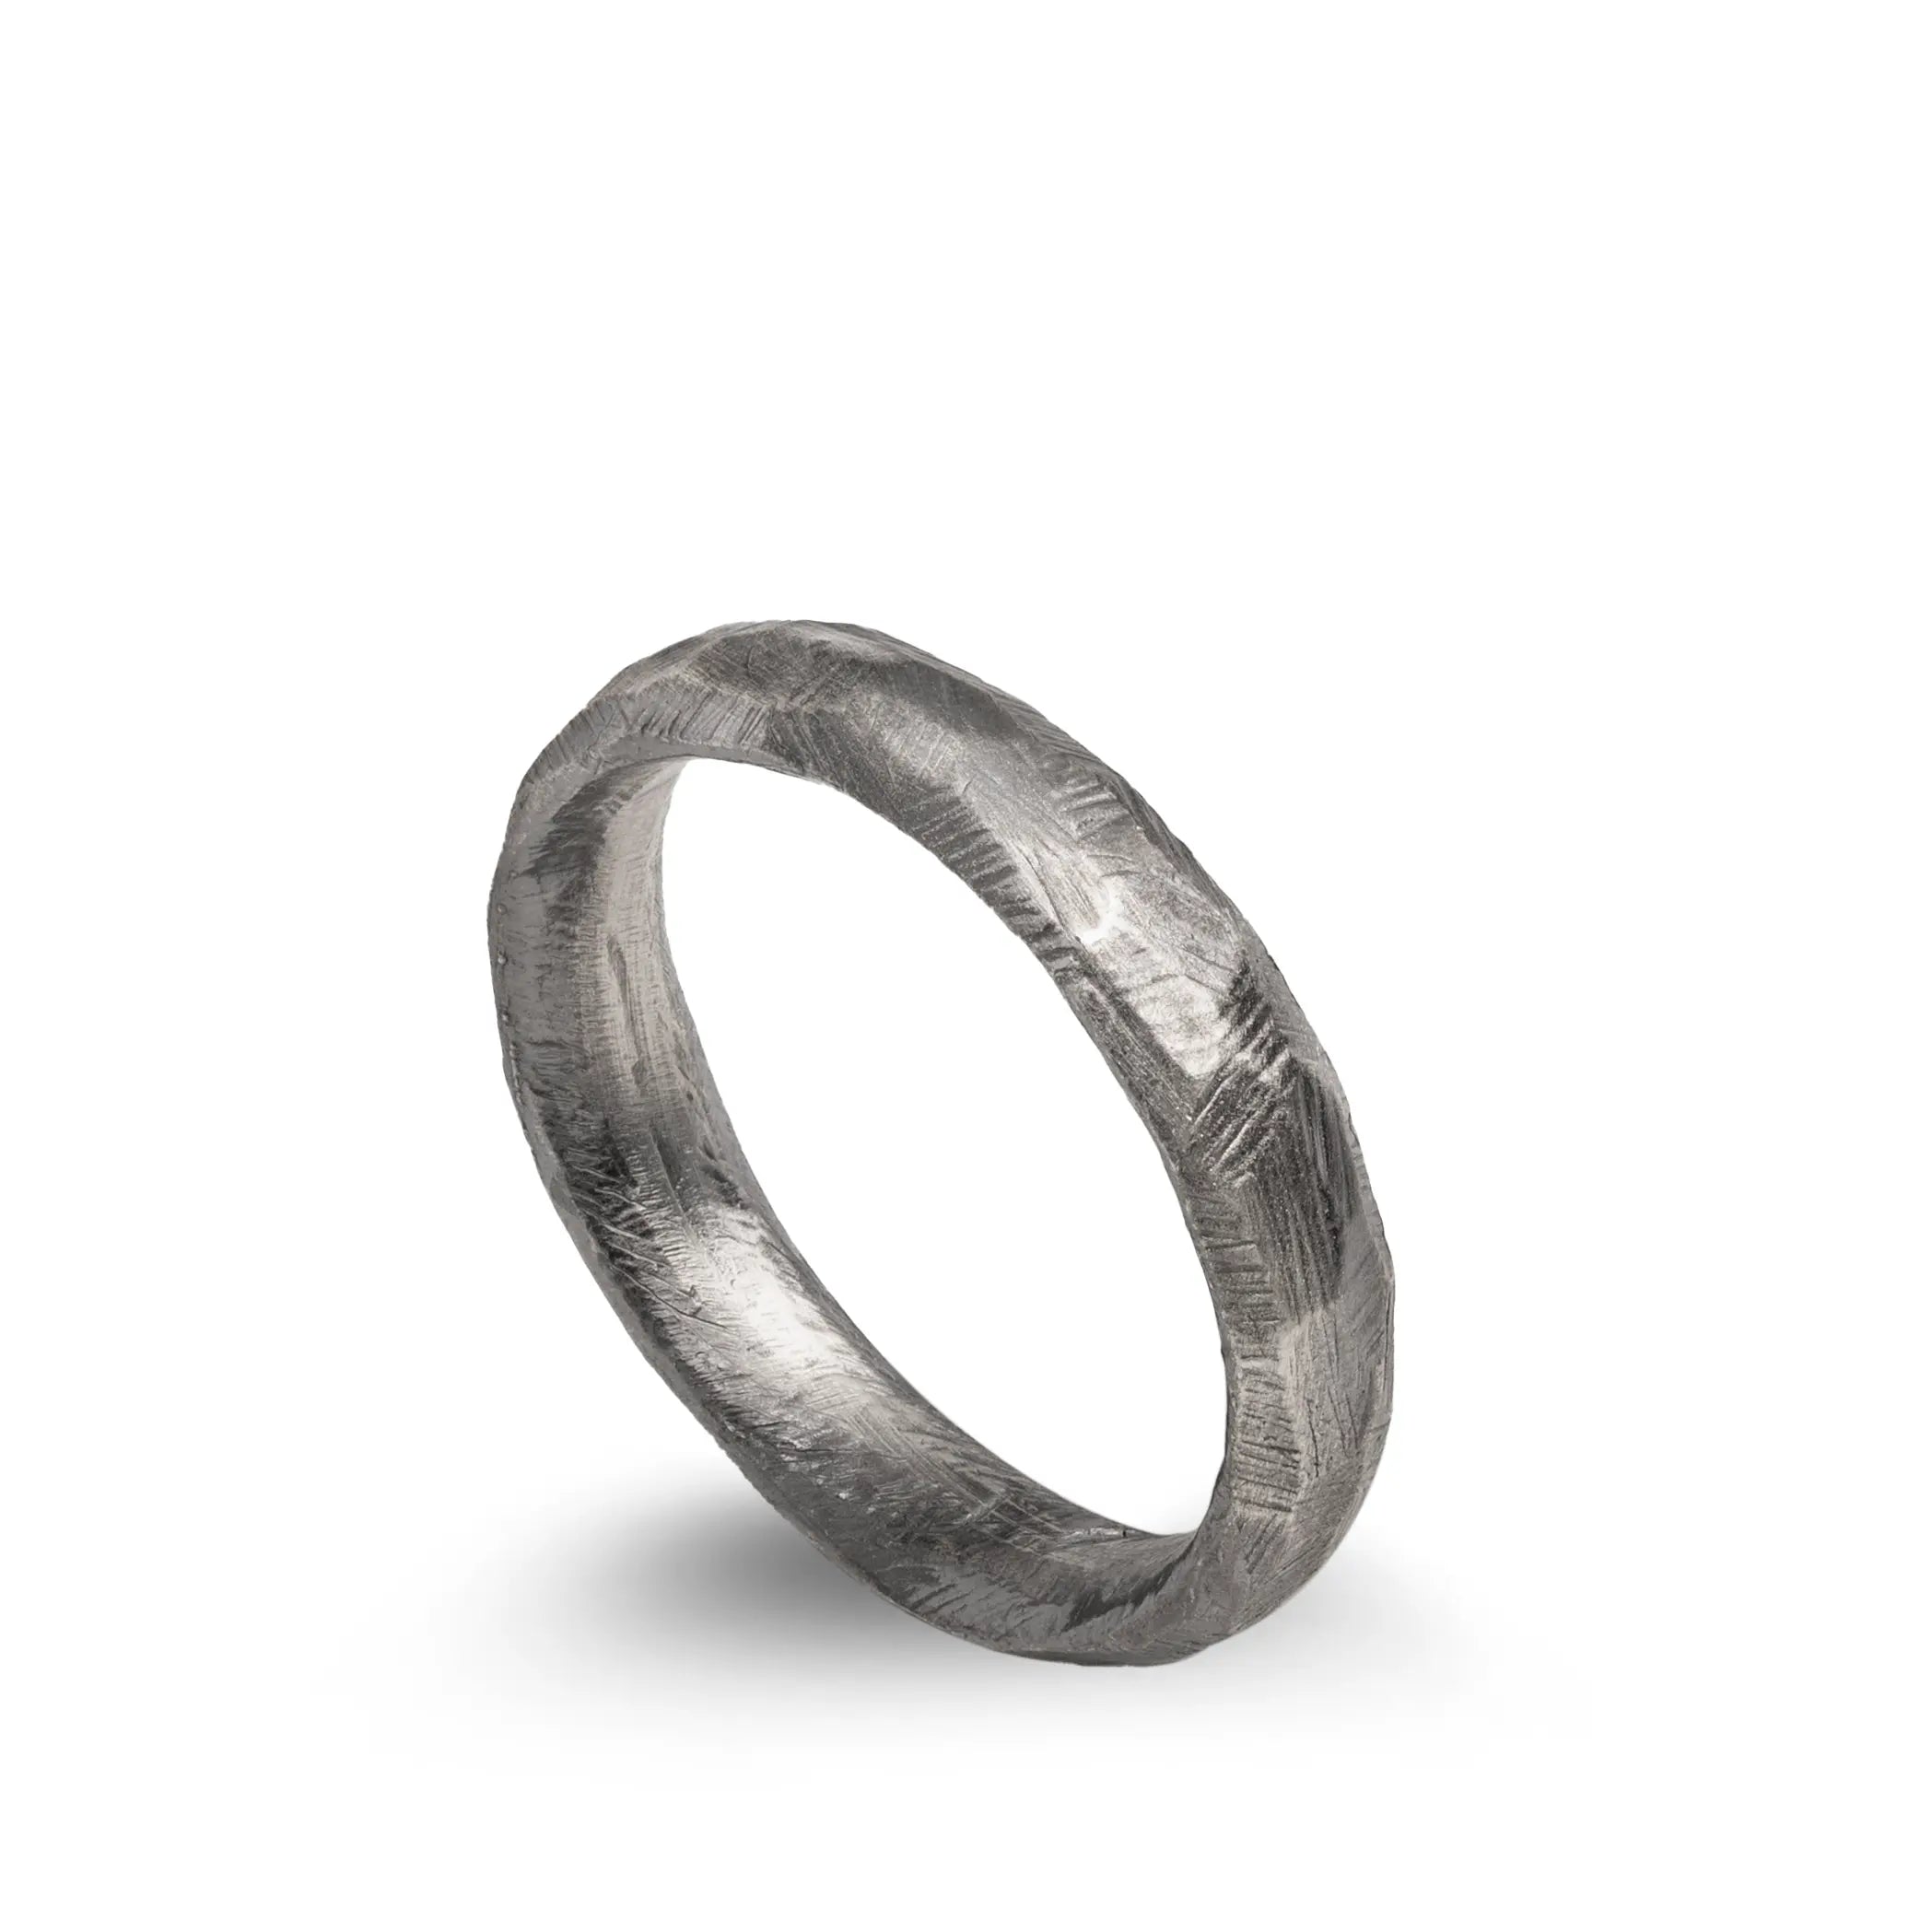 Faceted Band Ring Oxidized Silver 925